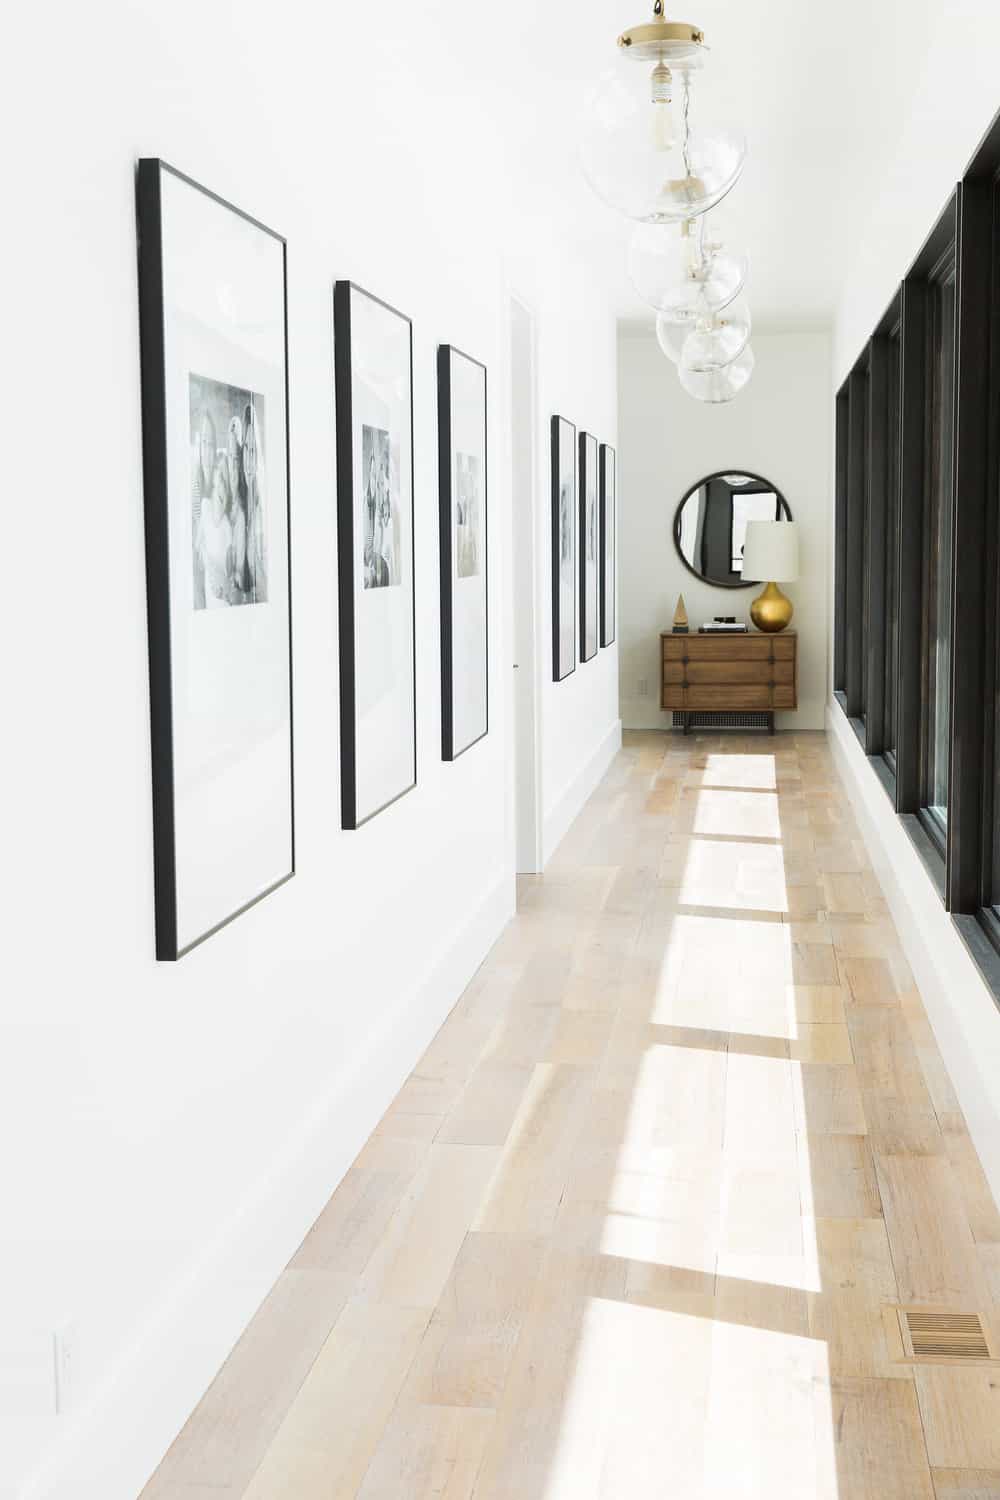 A hallway is a great place if you are wondering how to display family photos in a tasteful way in the parts of your house you walk through